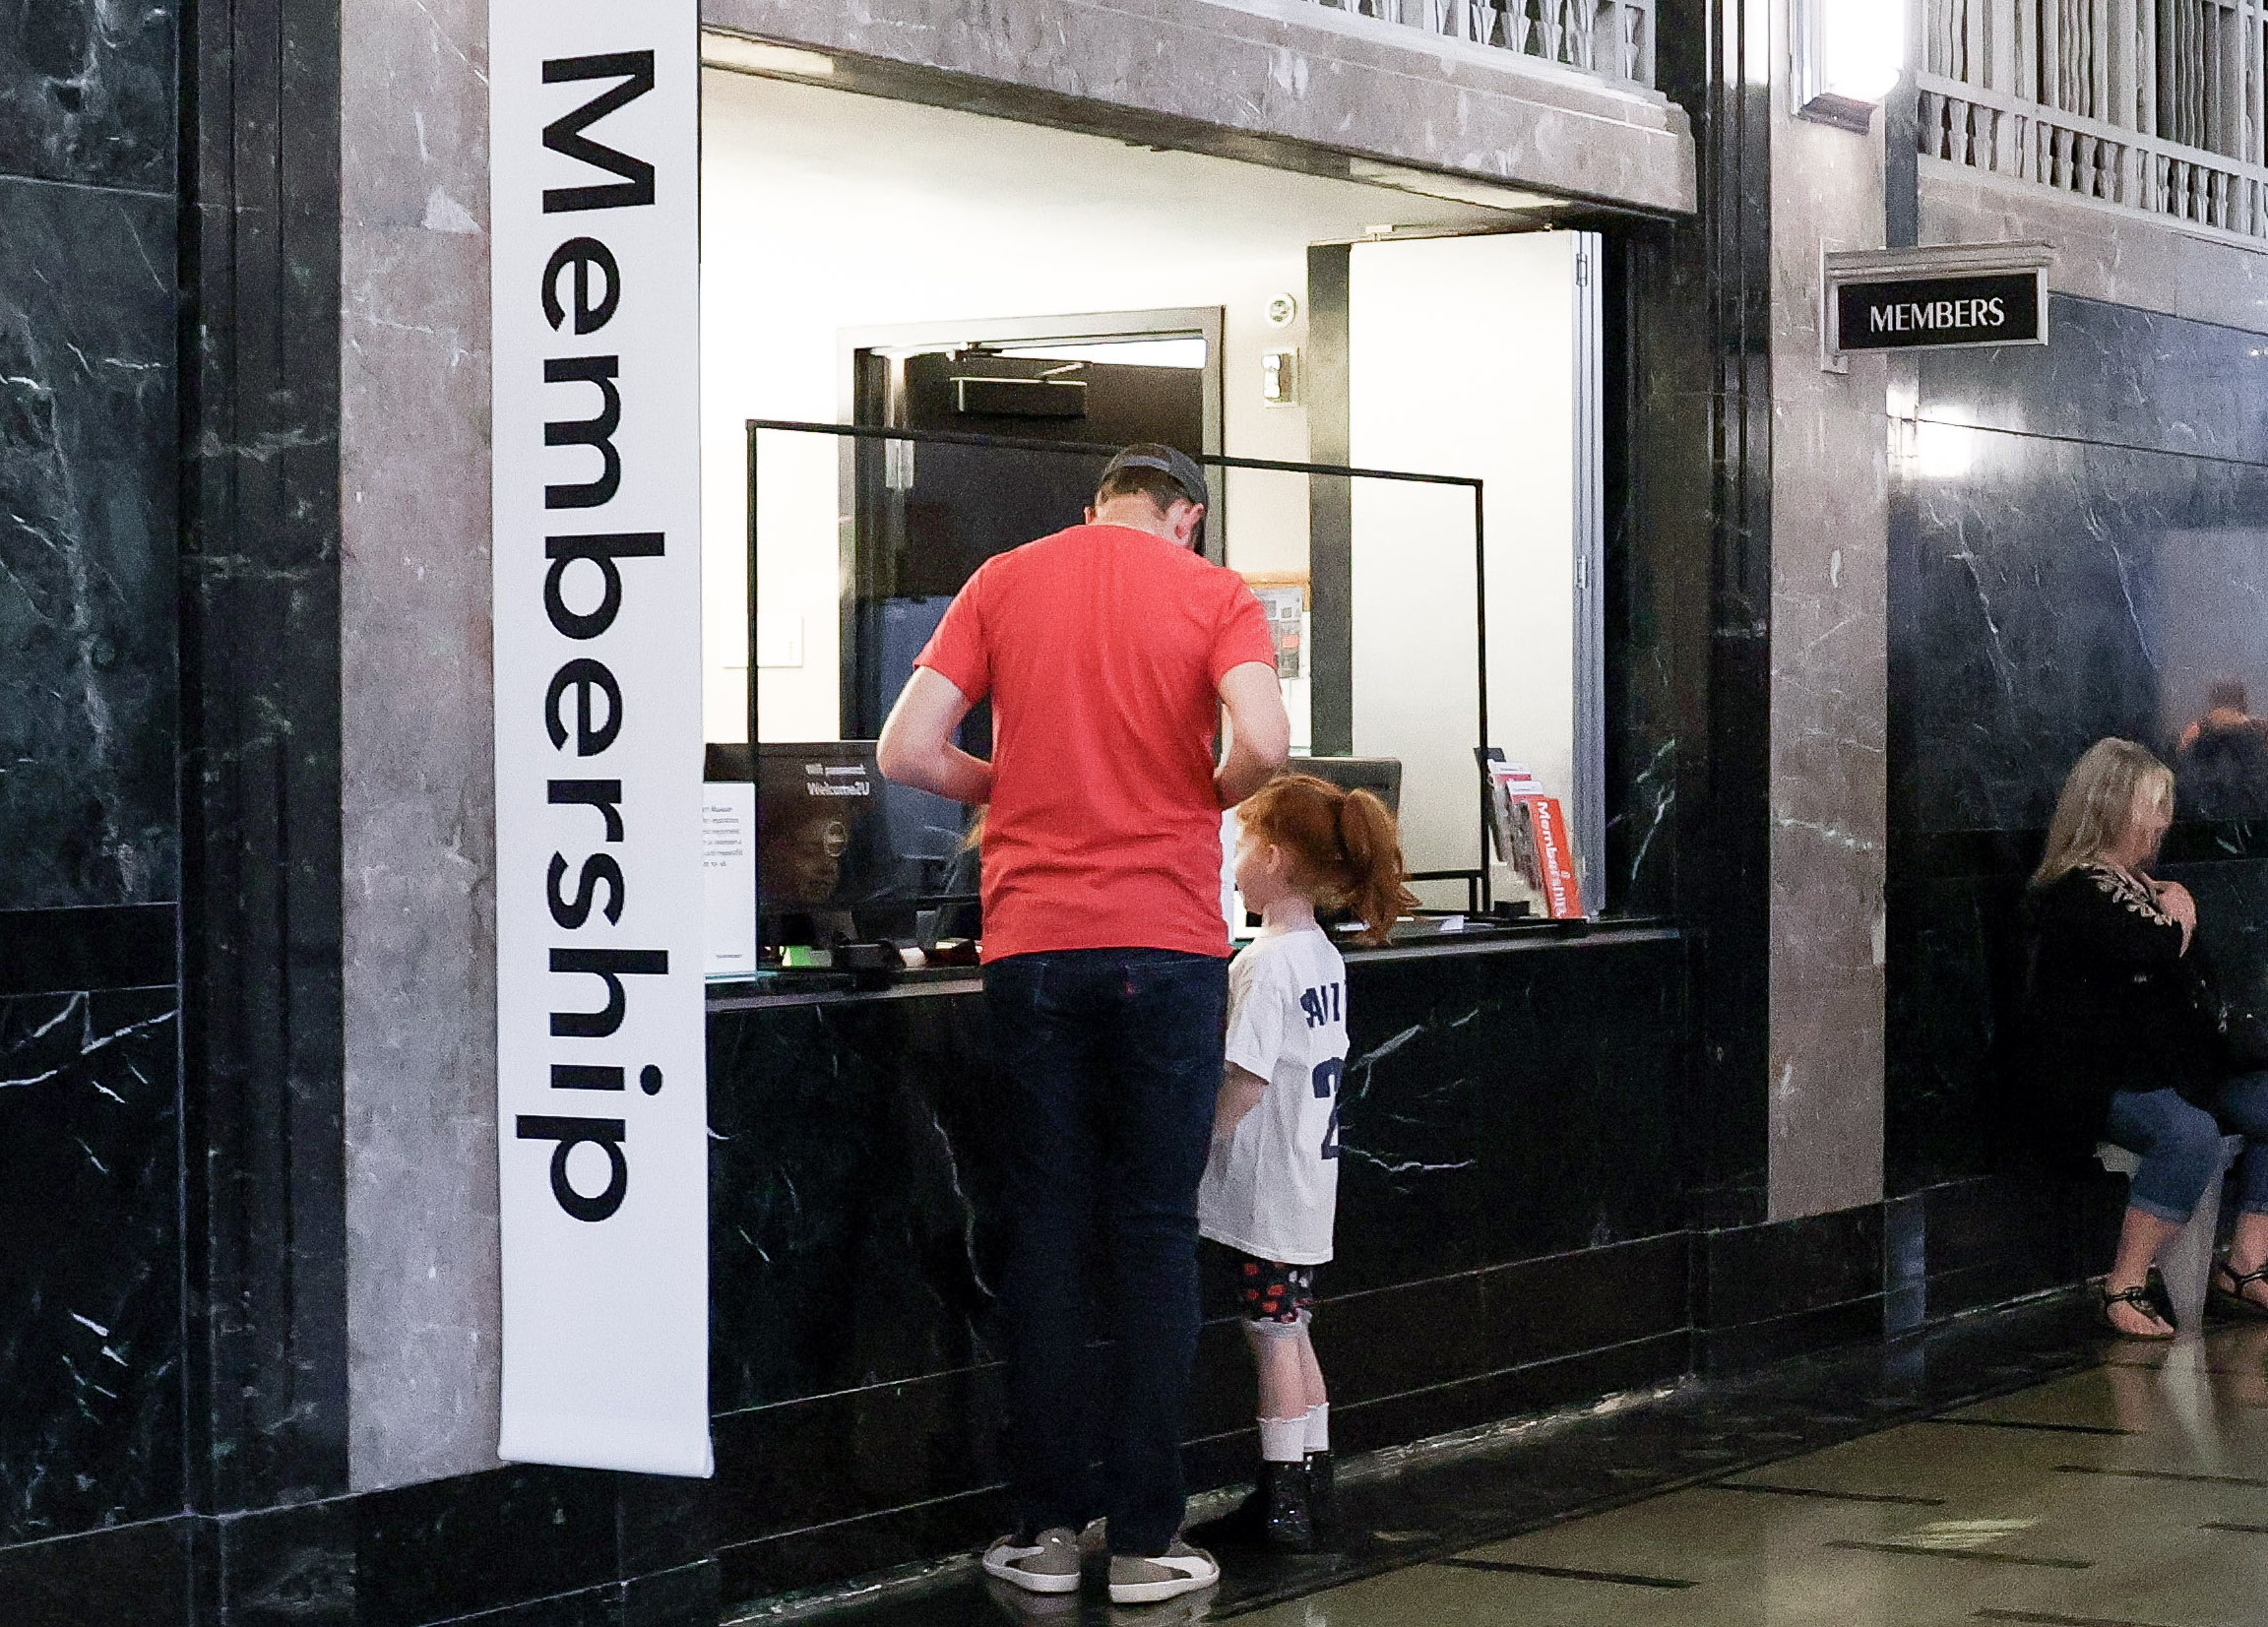 Father and daughter checking in at the membership window